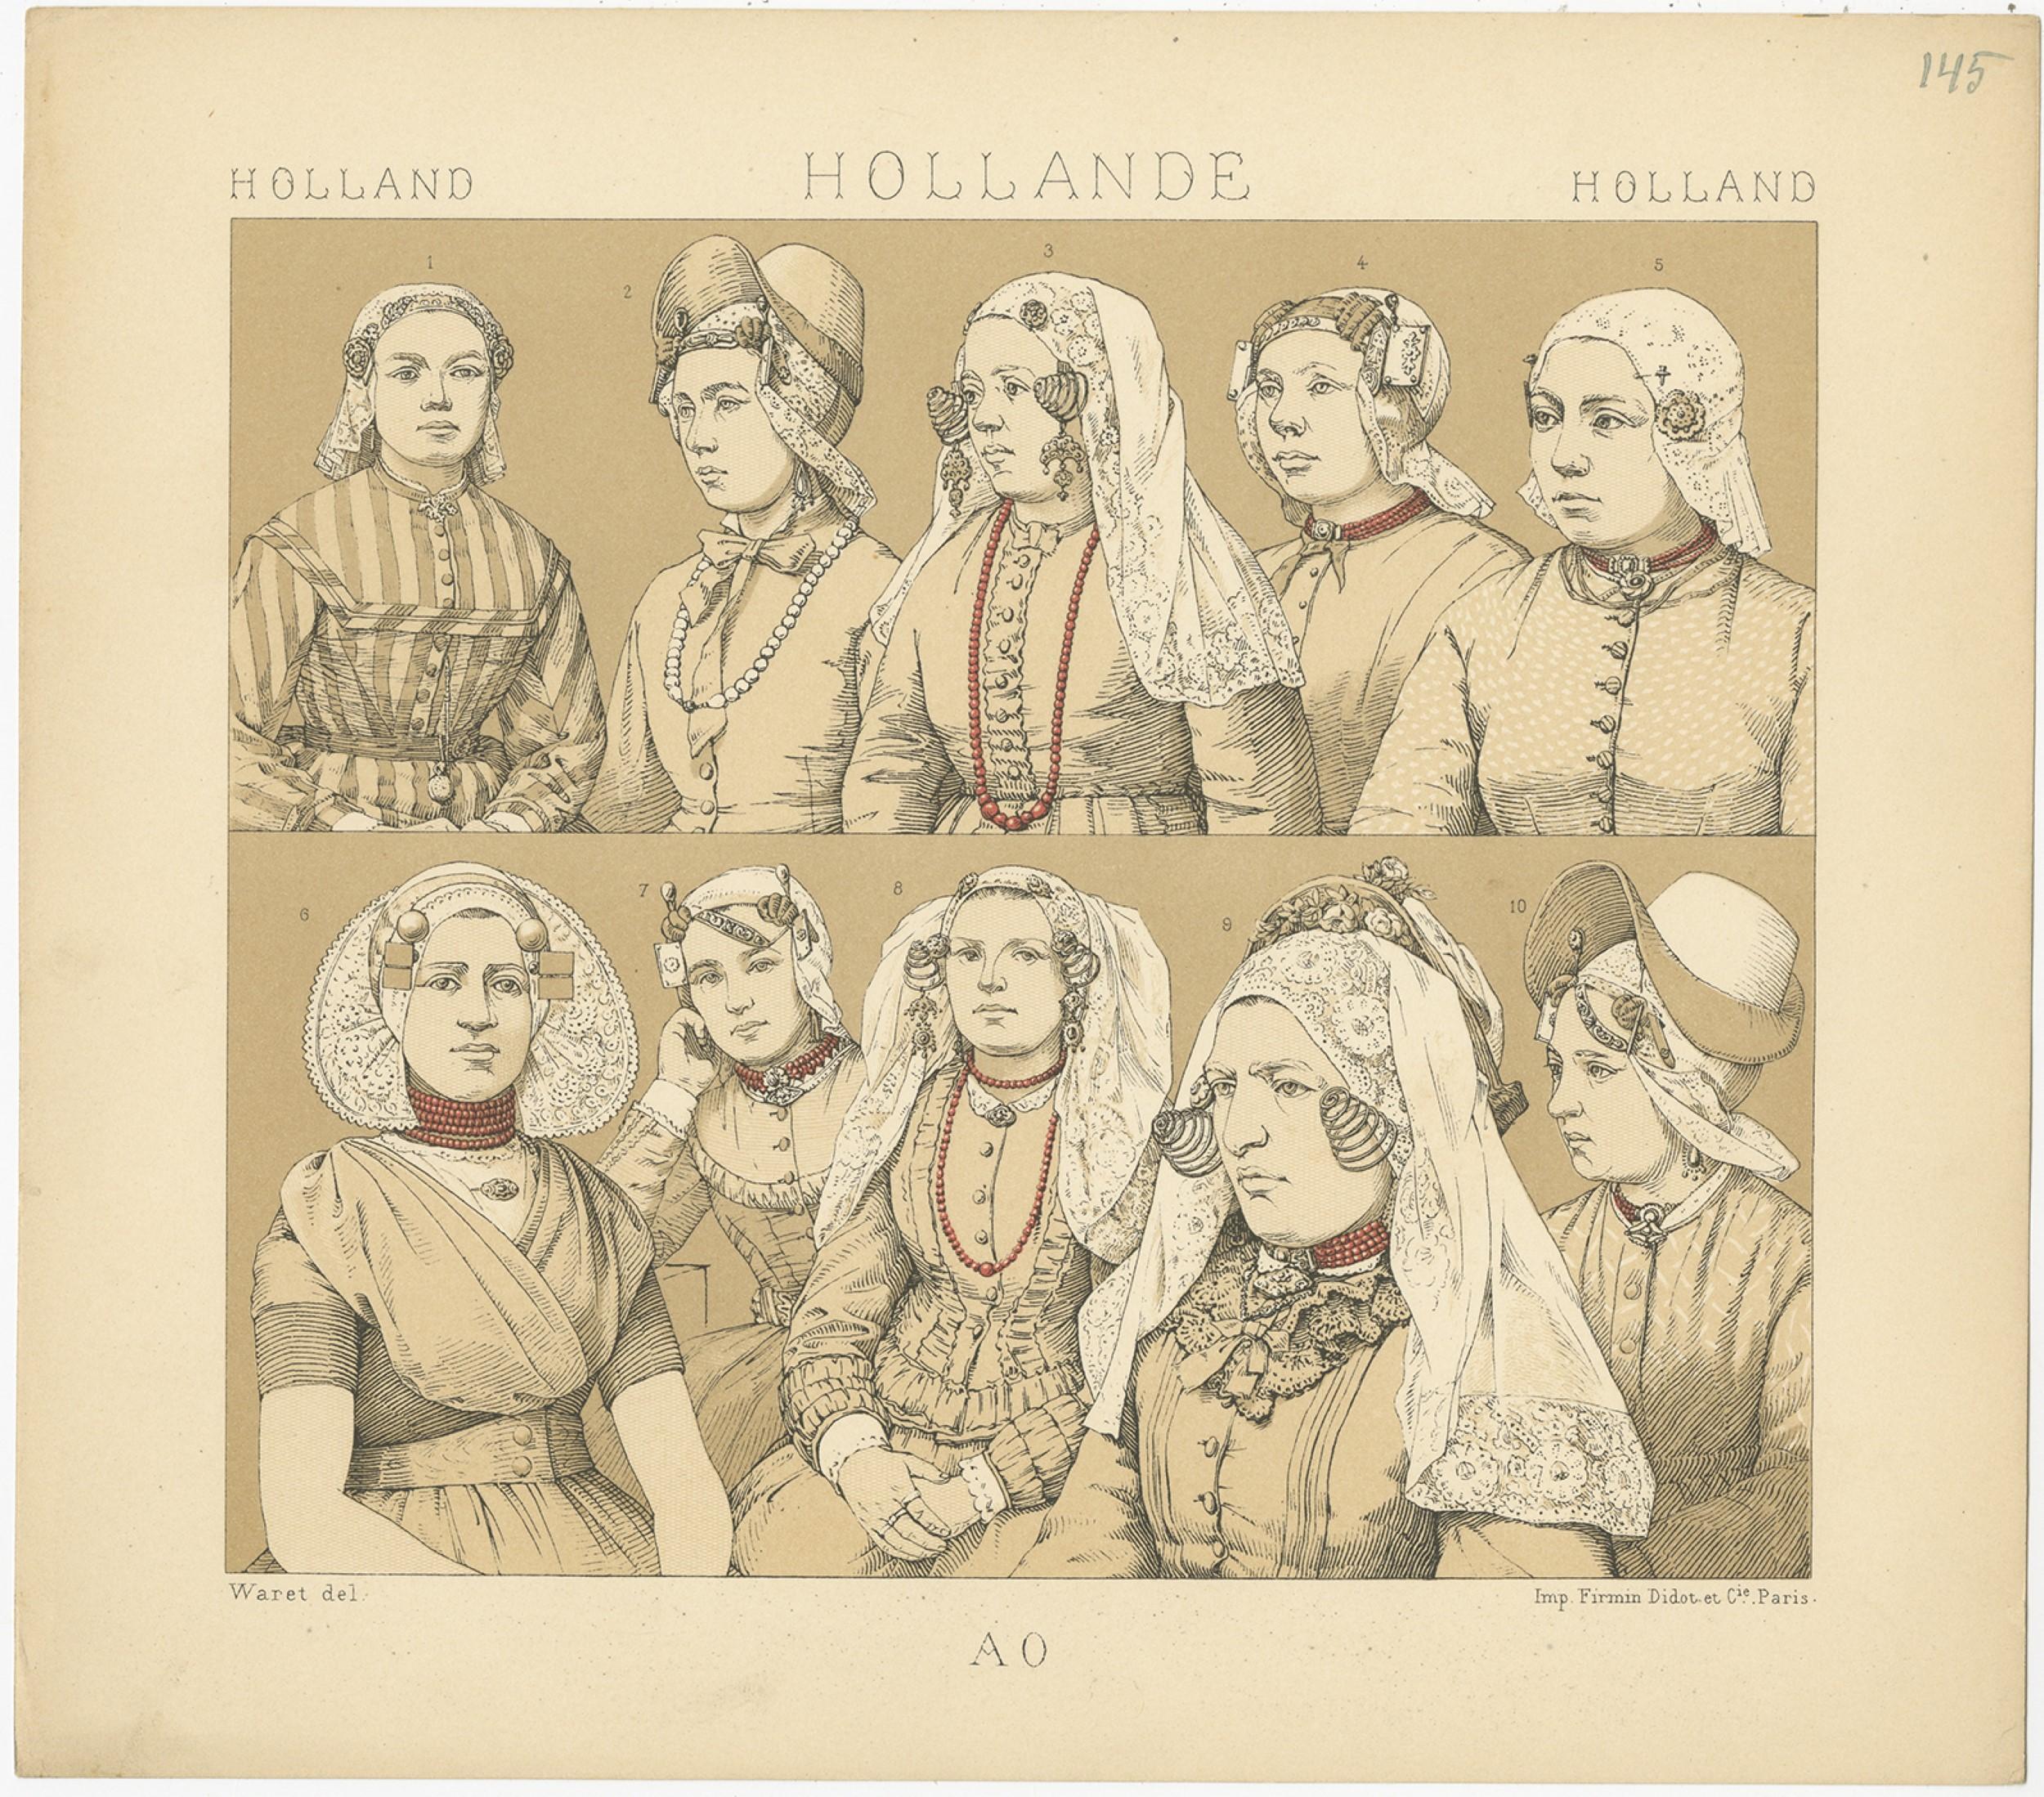 Antique print titled 'Holland - Hollande - Holland'. Chromolithograph of Holland women's outfits. This print originates from 'Le Costume Historique' by M.A. Racinet. Published, circa 1880.

   